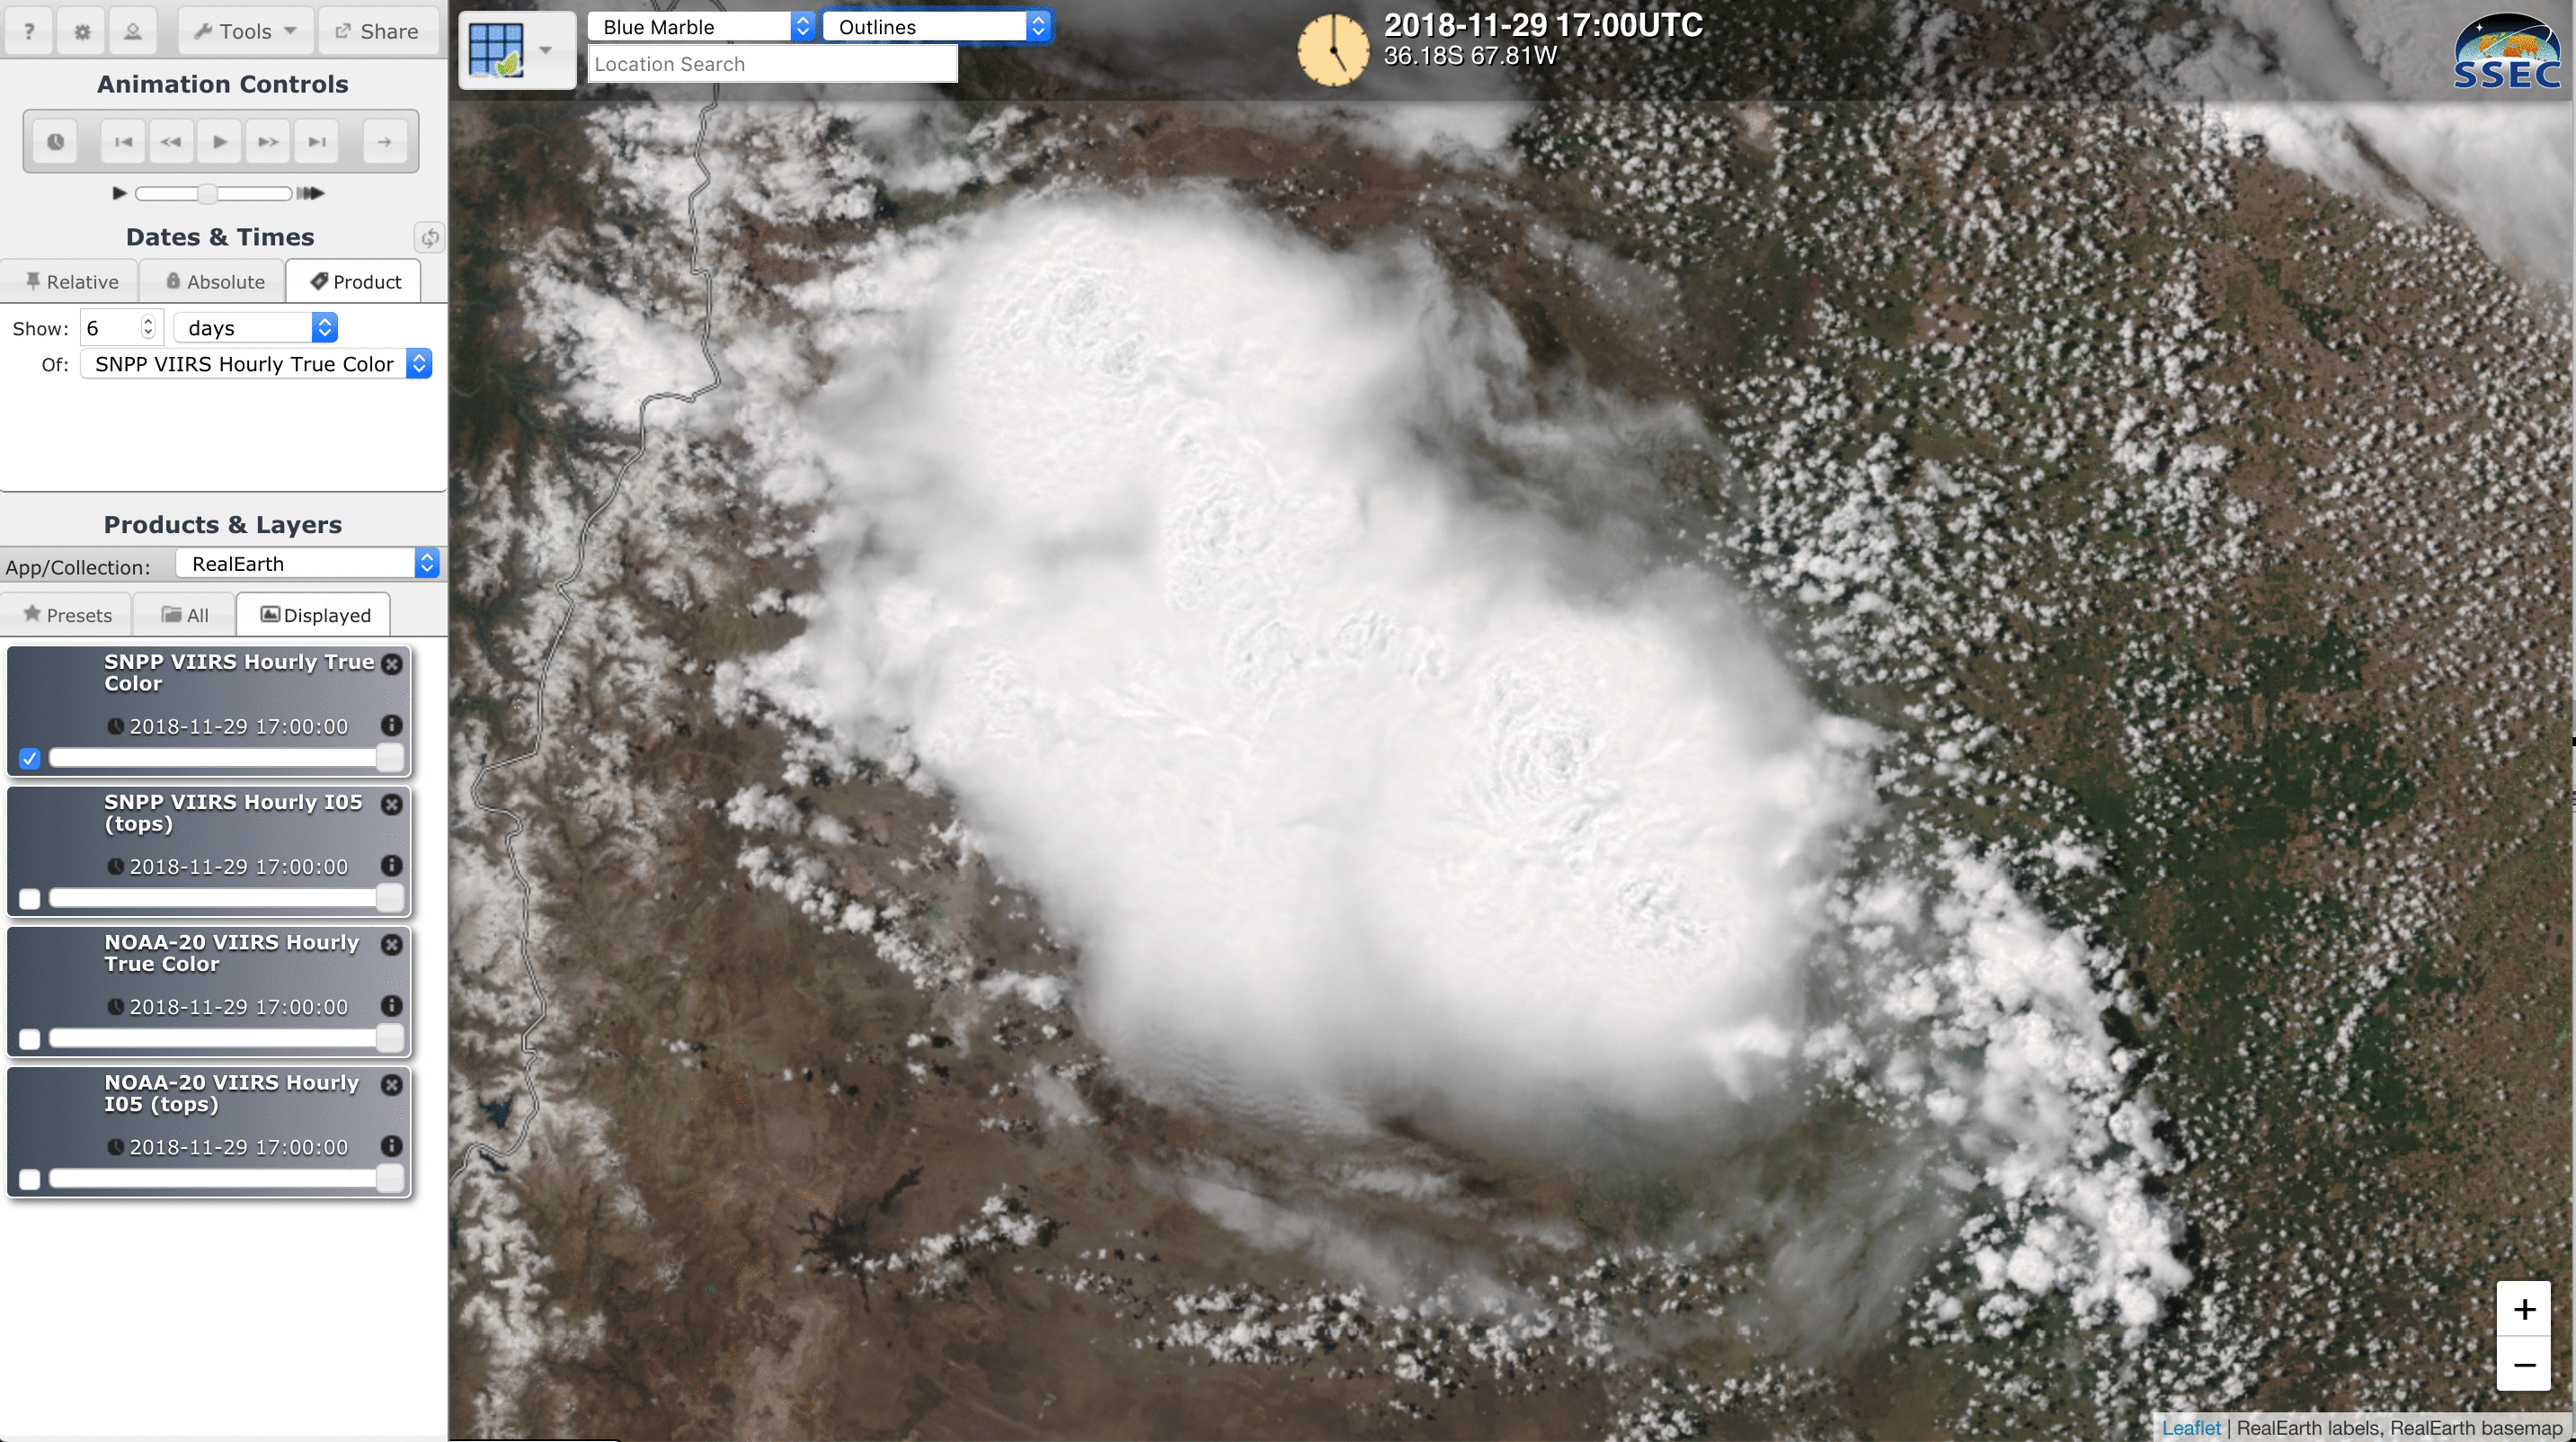 Suomi NPP VIIRS True Color RGB and Infrared Windoe (11.45 µm) images at 1753 UTC [click to enlarge]